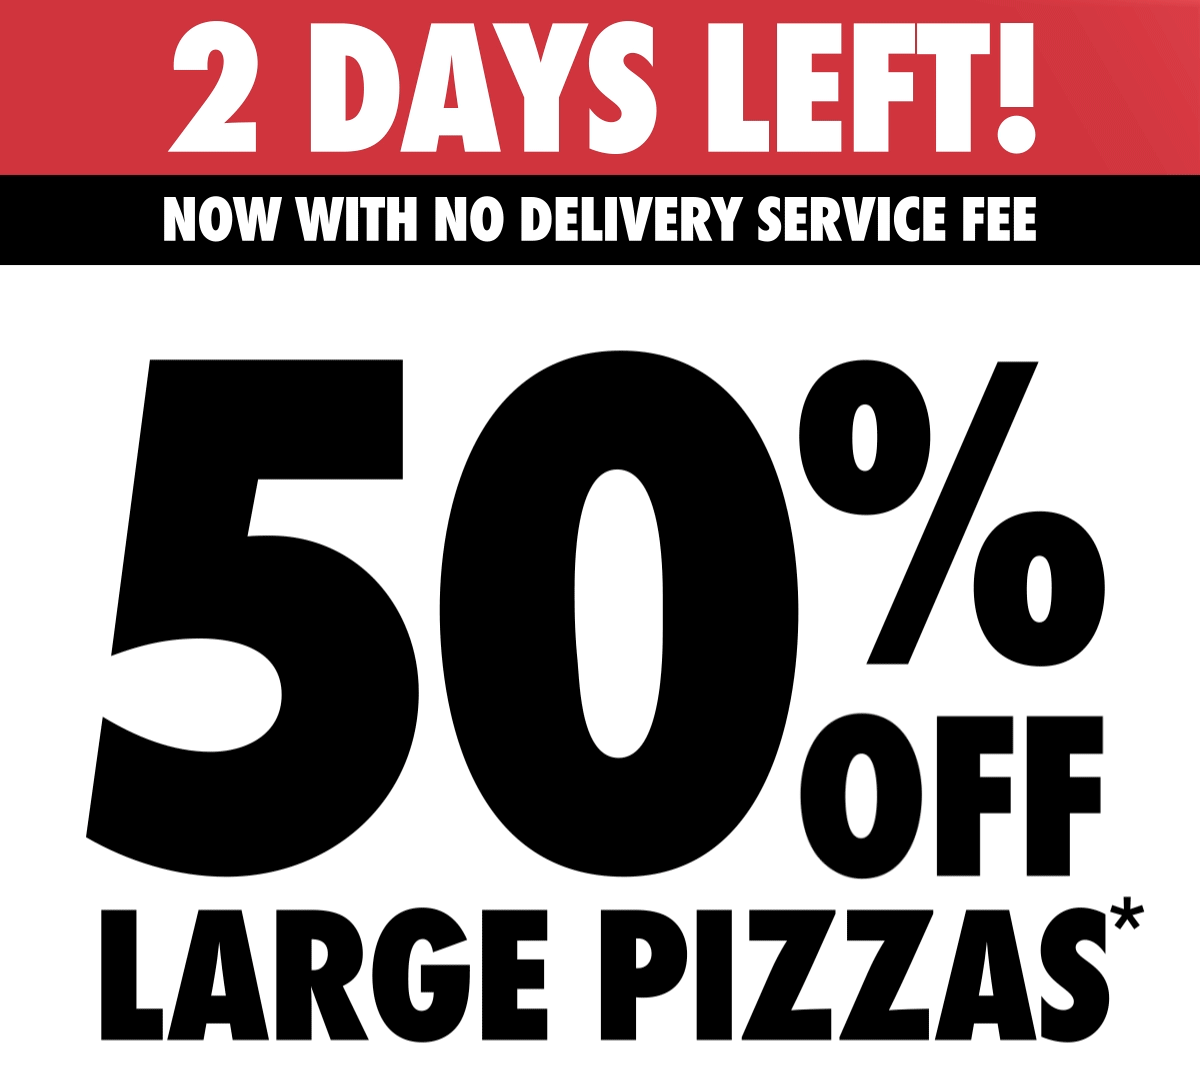 Domino's - Domino’s 50% Off Large Pizzas